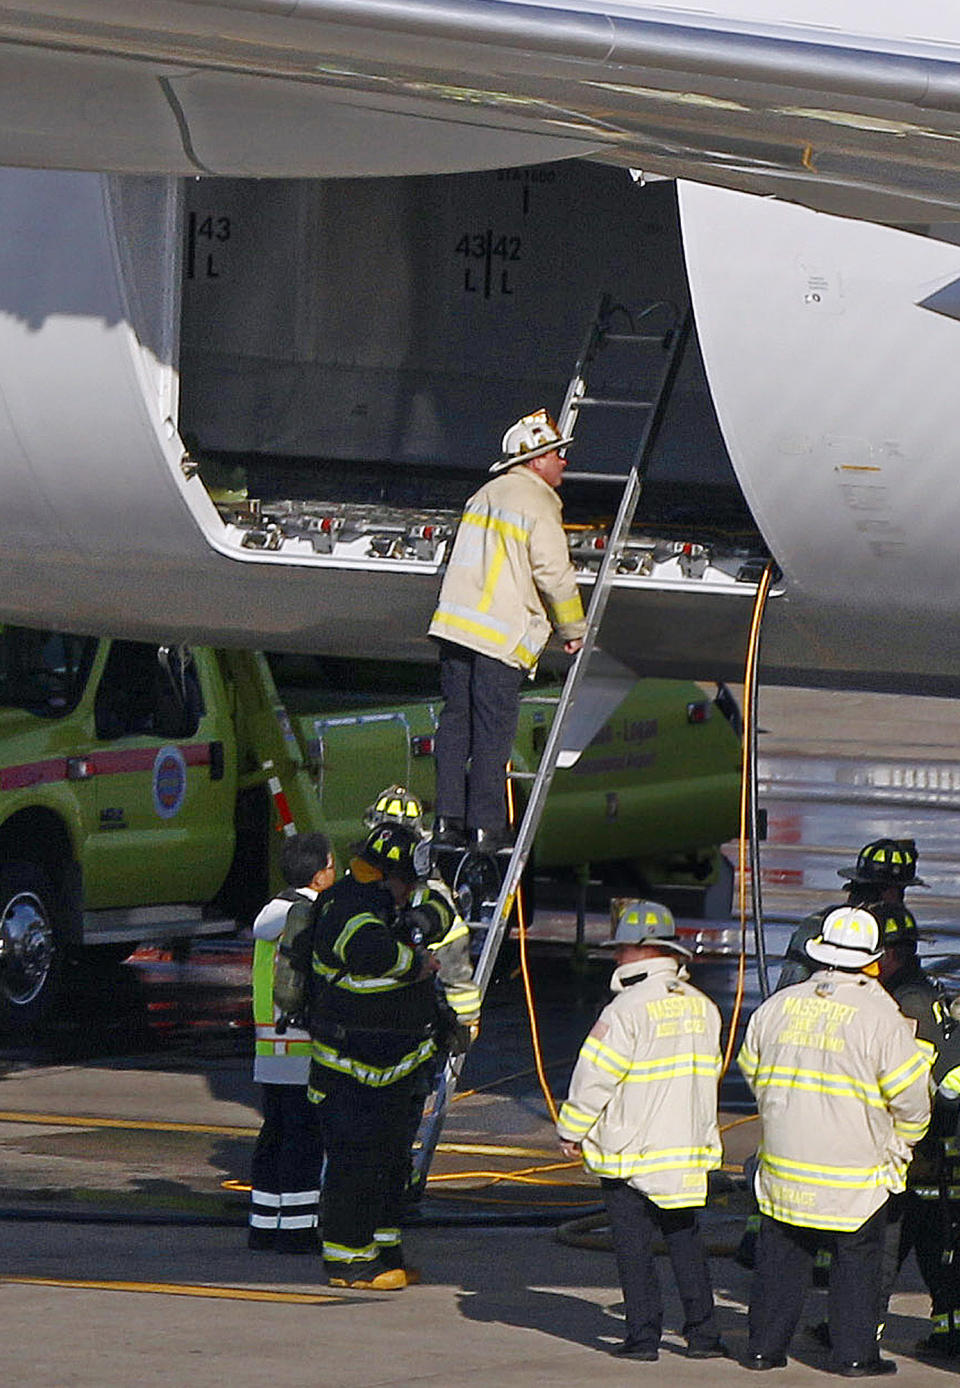 A Boston Fire Department chief looks into the cargo hold of a Japan Airlines Boeing 787 Dreamliner jet parked at a Terminal E gate at Logan International Airport in Boston, Monday, Jan. 7, 2013. A small electrical fire filled the cabin of the JAL aircraft with smoke Monday morning about 15 minutes after it landed in Boston. (AP Photo/Stephan Savoia)